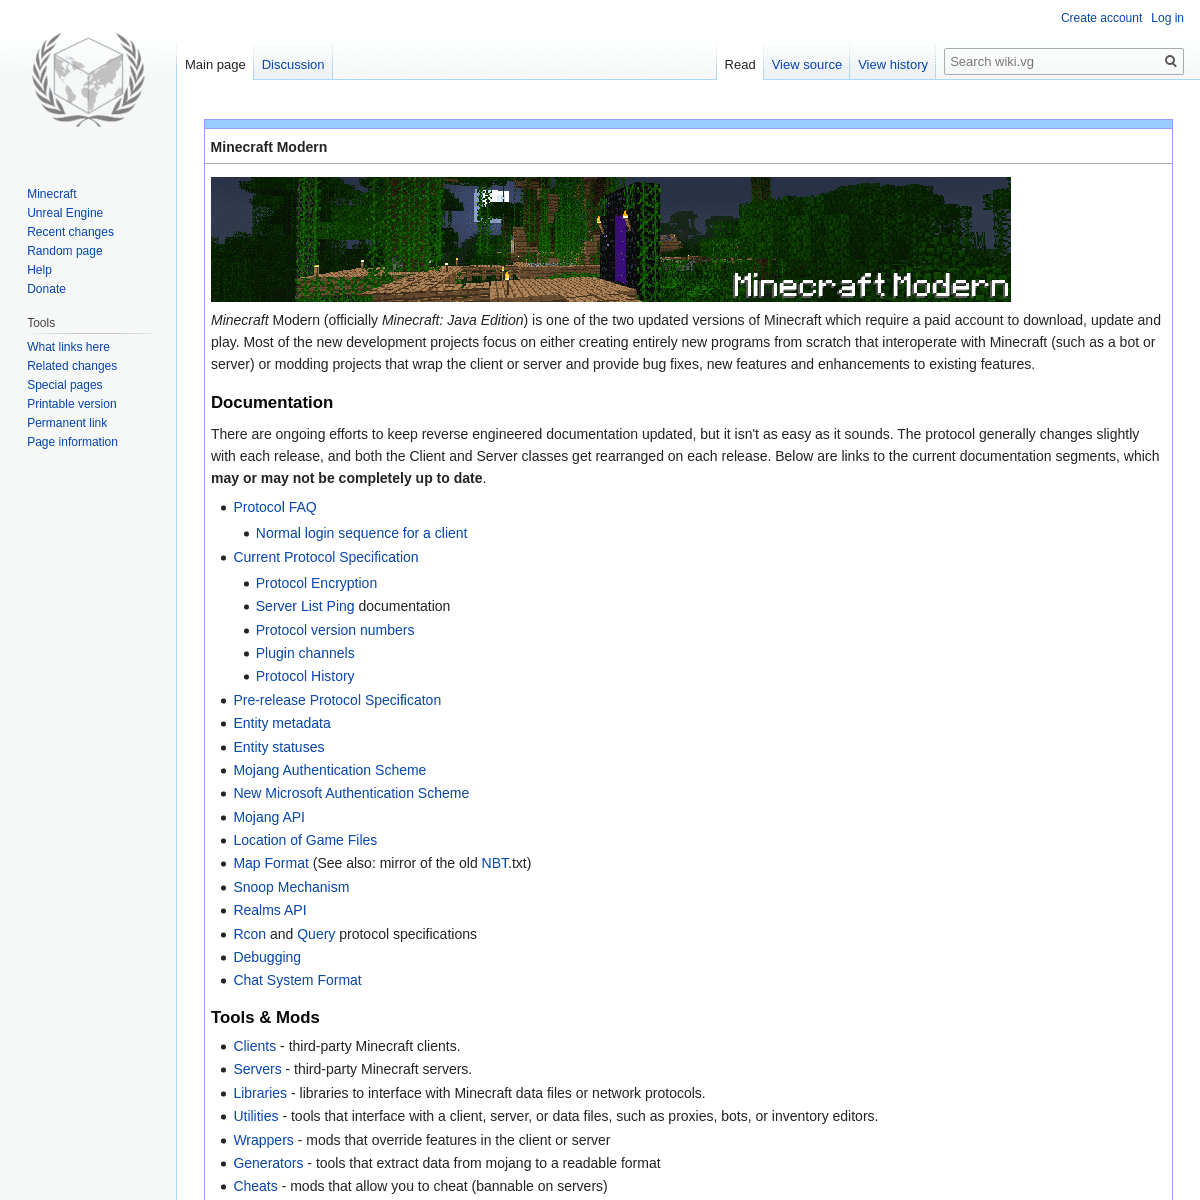 A complete backup of https://wiki.vg